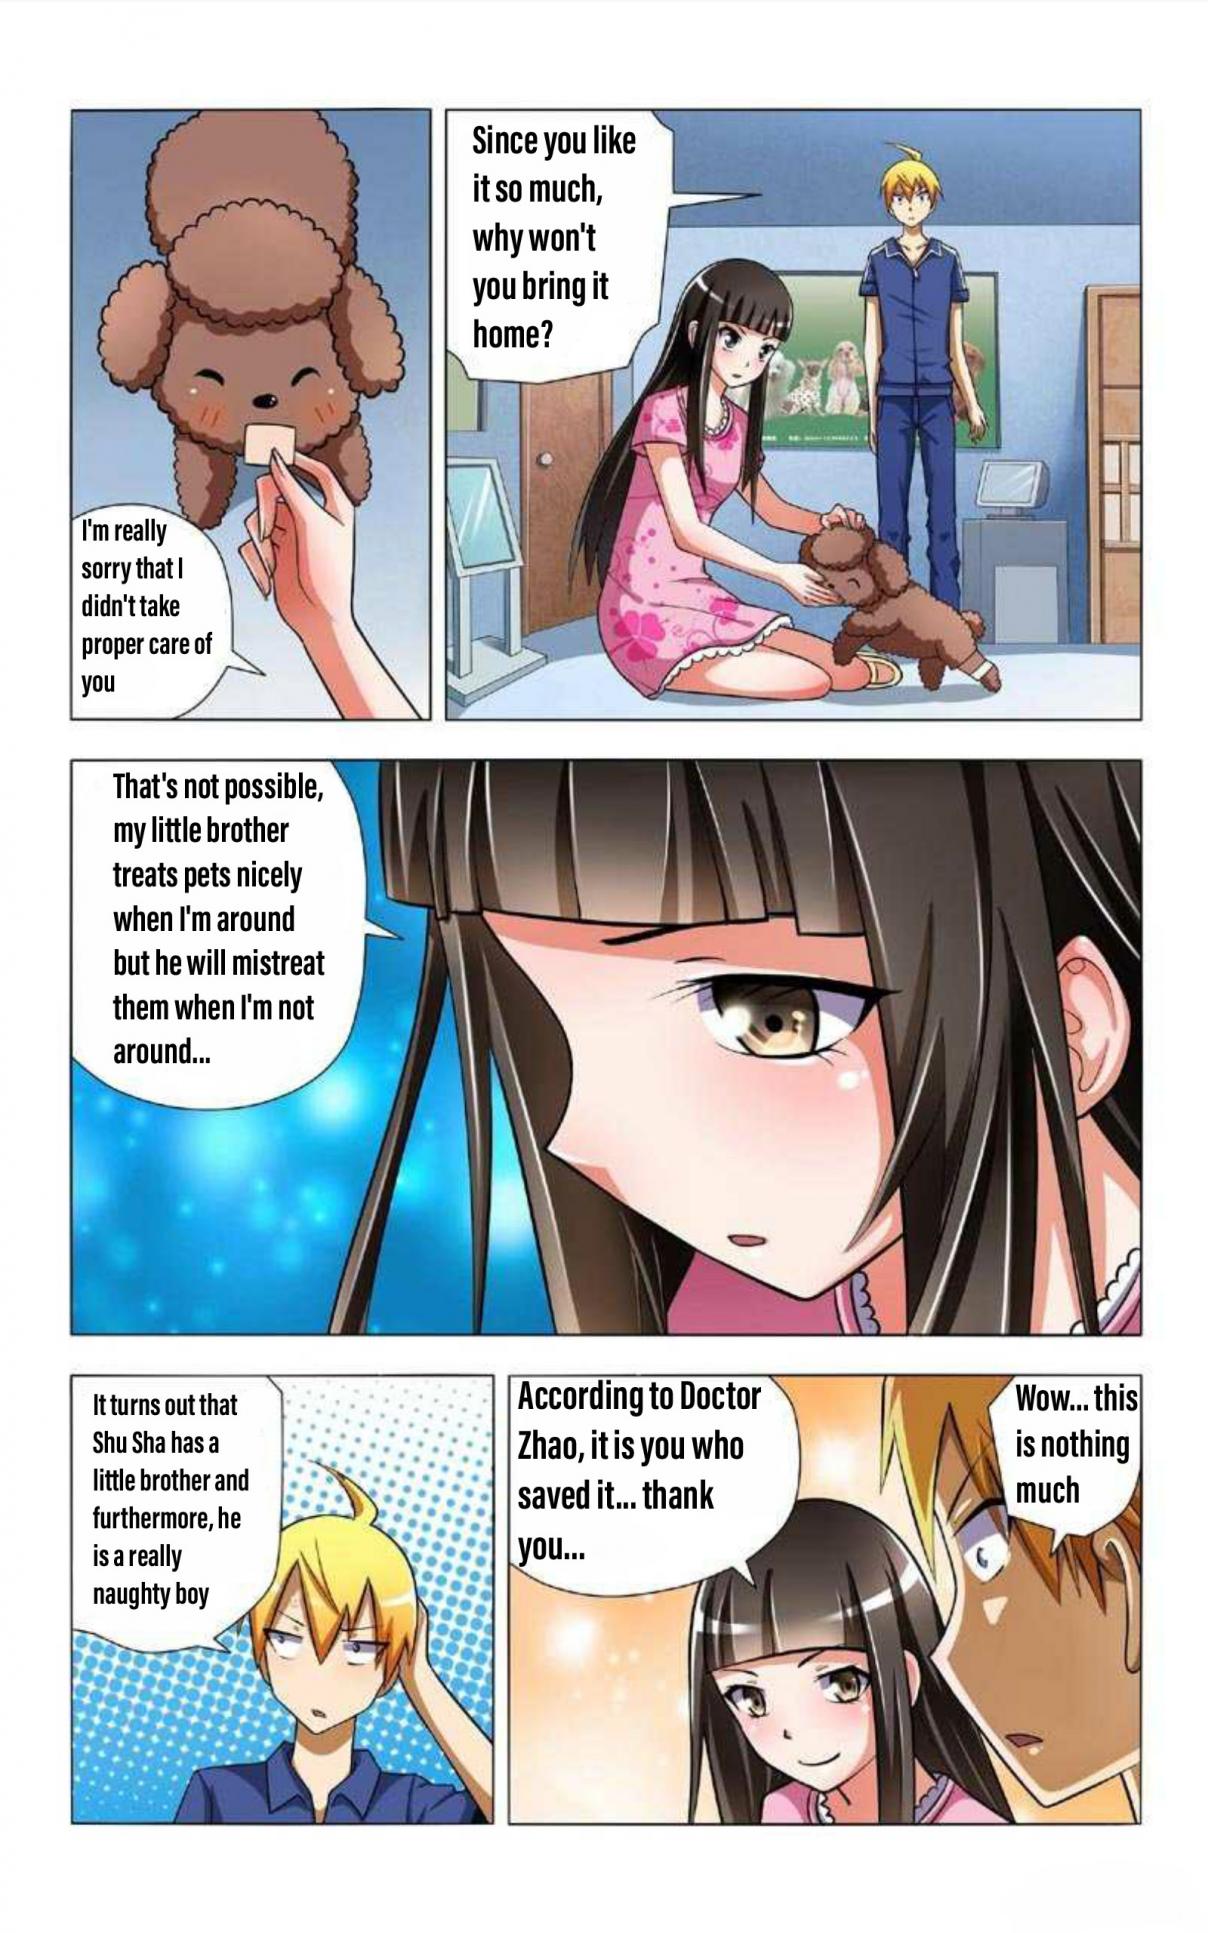 I Don't Want to Be Bullied By Girls Ch. 5 Misunderstanding, Dog and a Rainy day